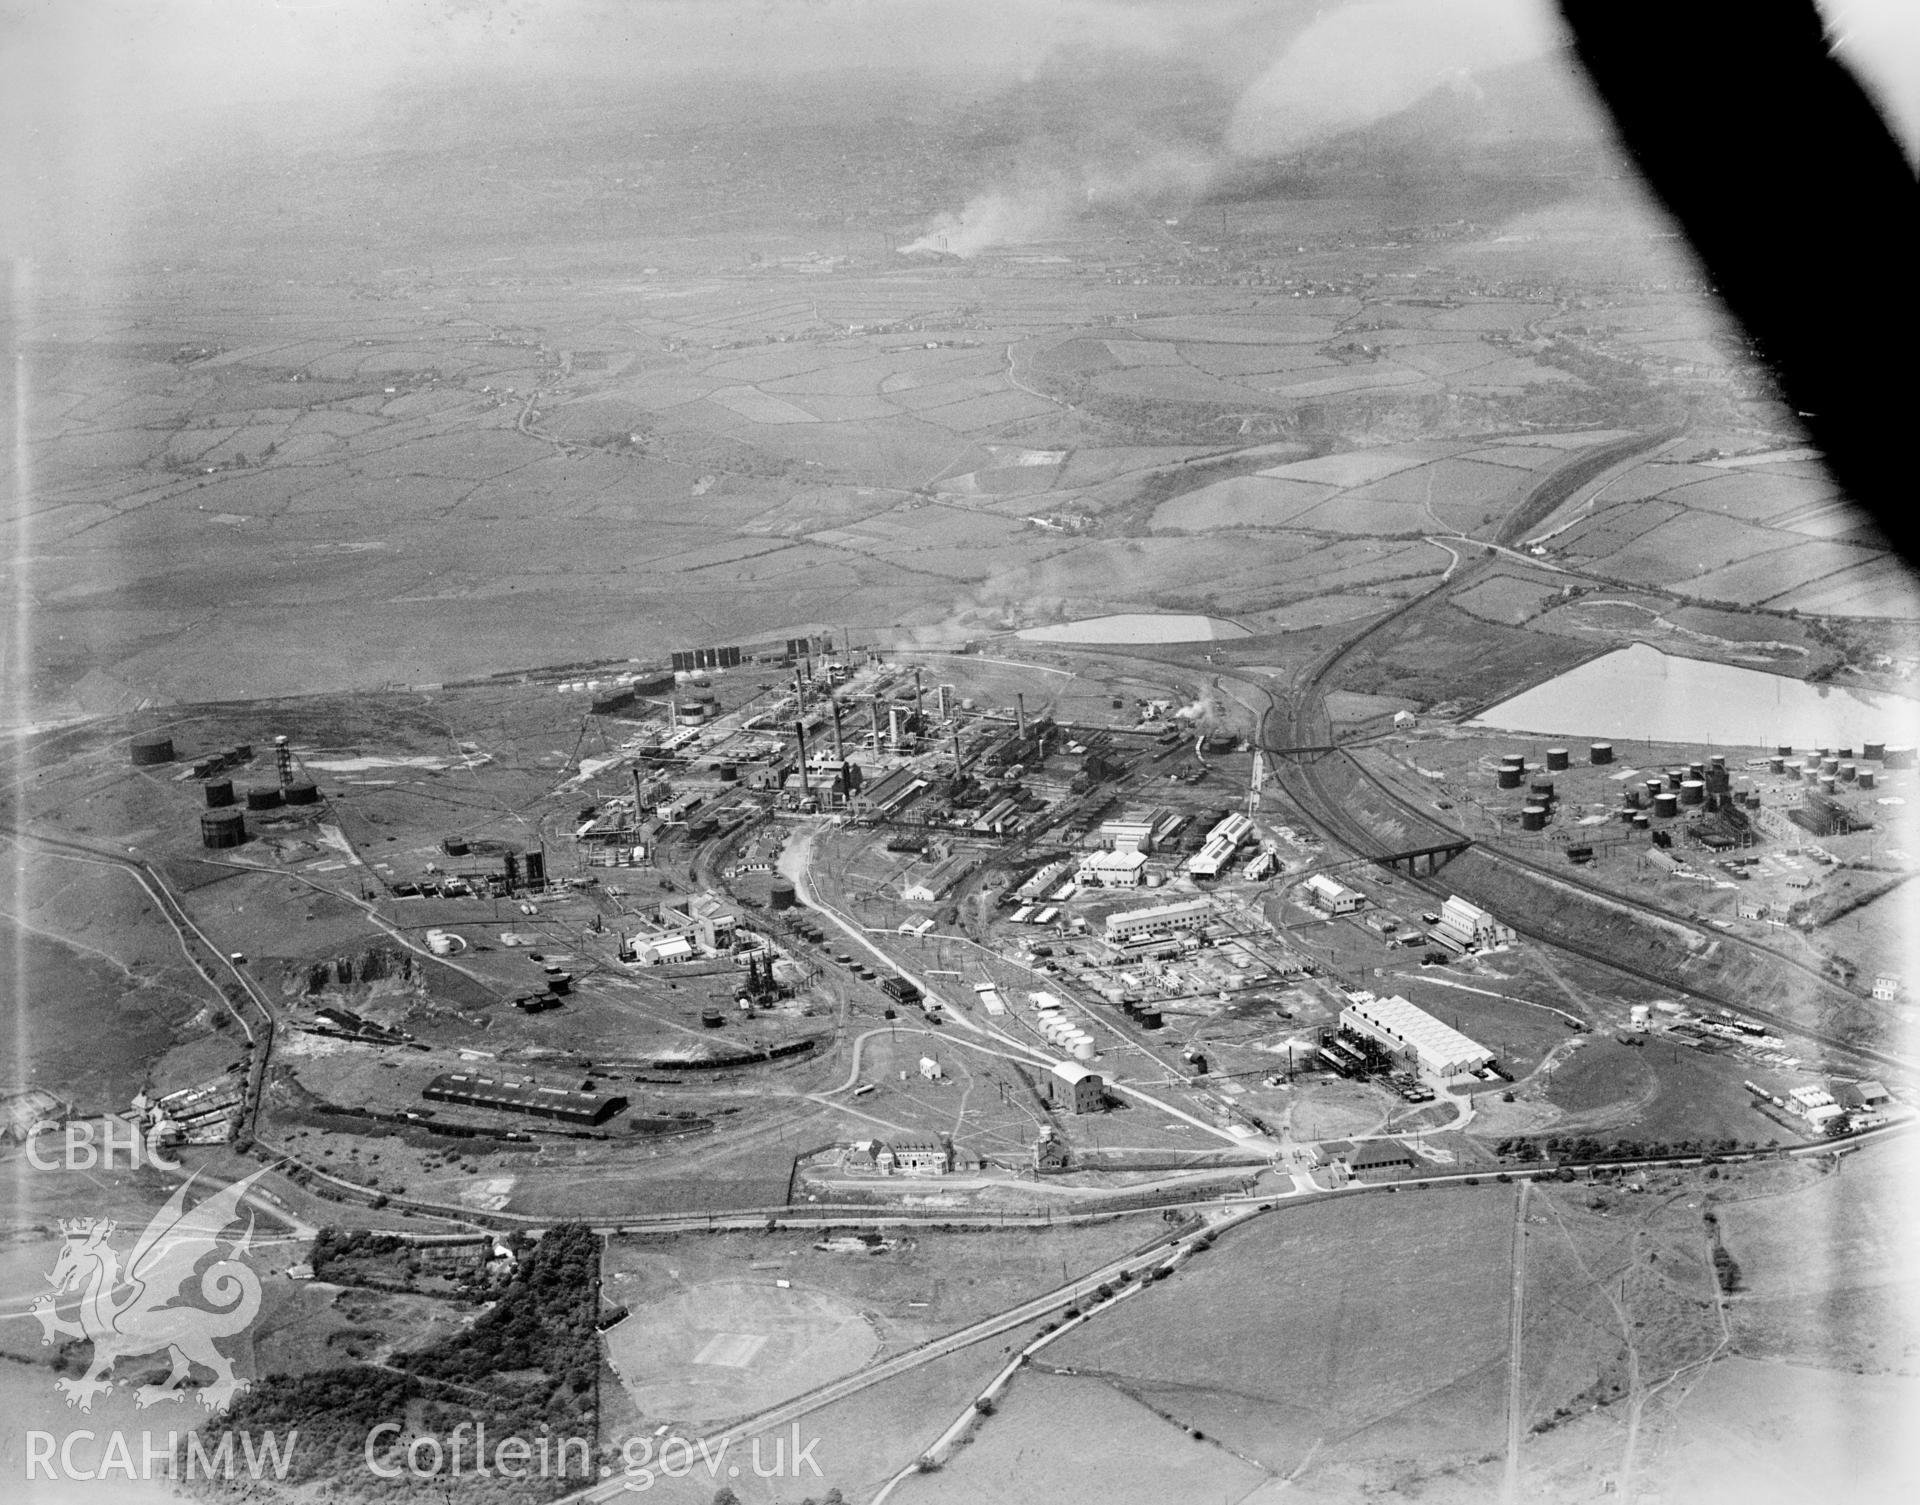 View of National Oil Refineries (Anglo-Persion) Llandarcy, oblique aerial view. 5?x4? black and white glass plate negative.